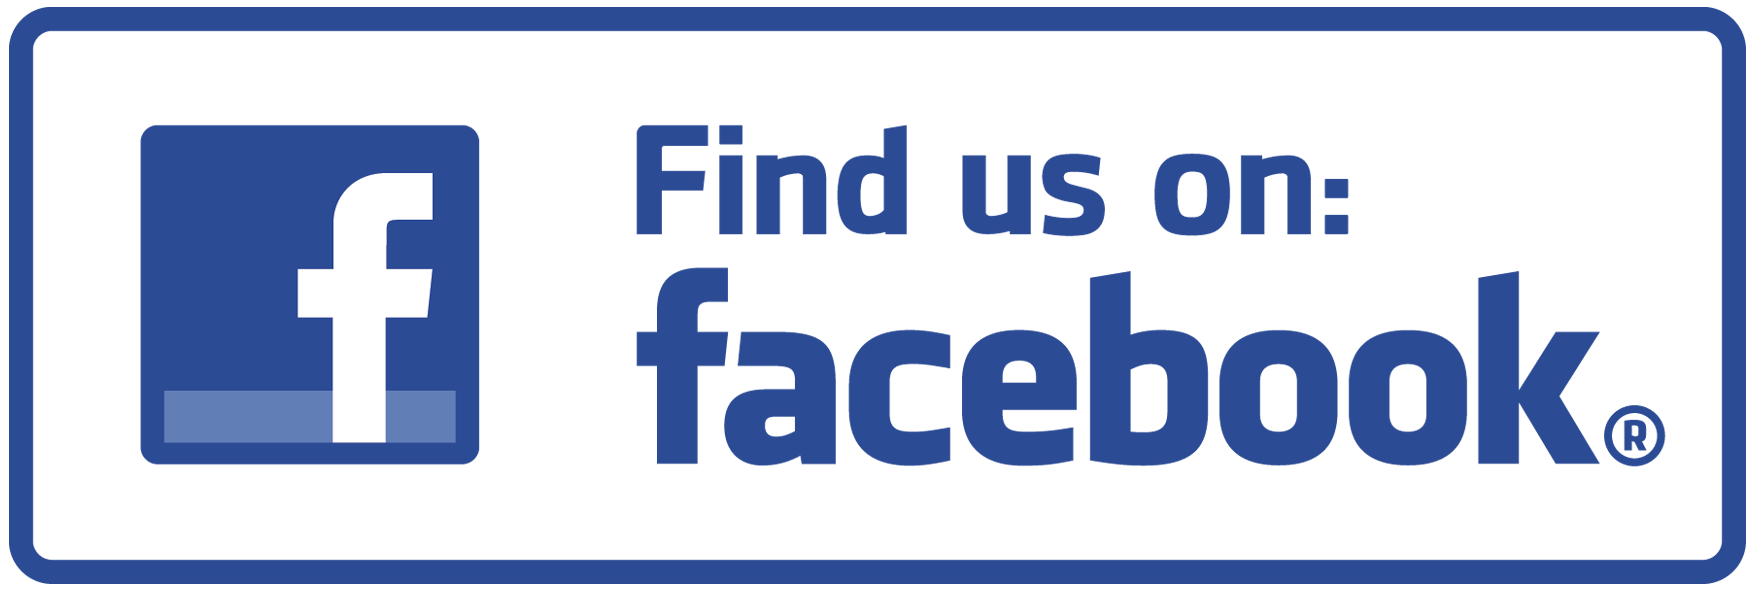 Follow Us On Facebook Logo - Follow Us On Facebook Logo Png (90+ images in Collection) Page 1